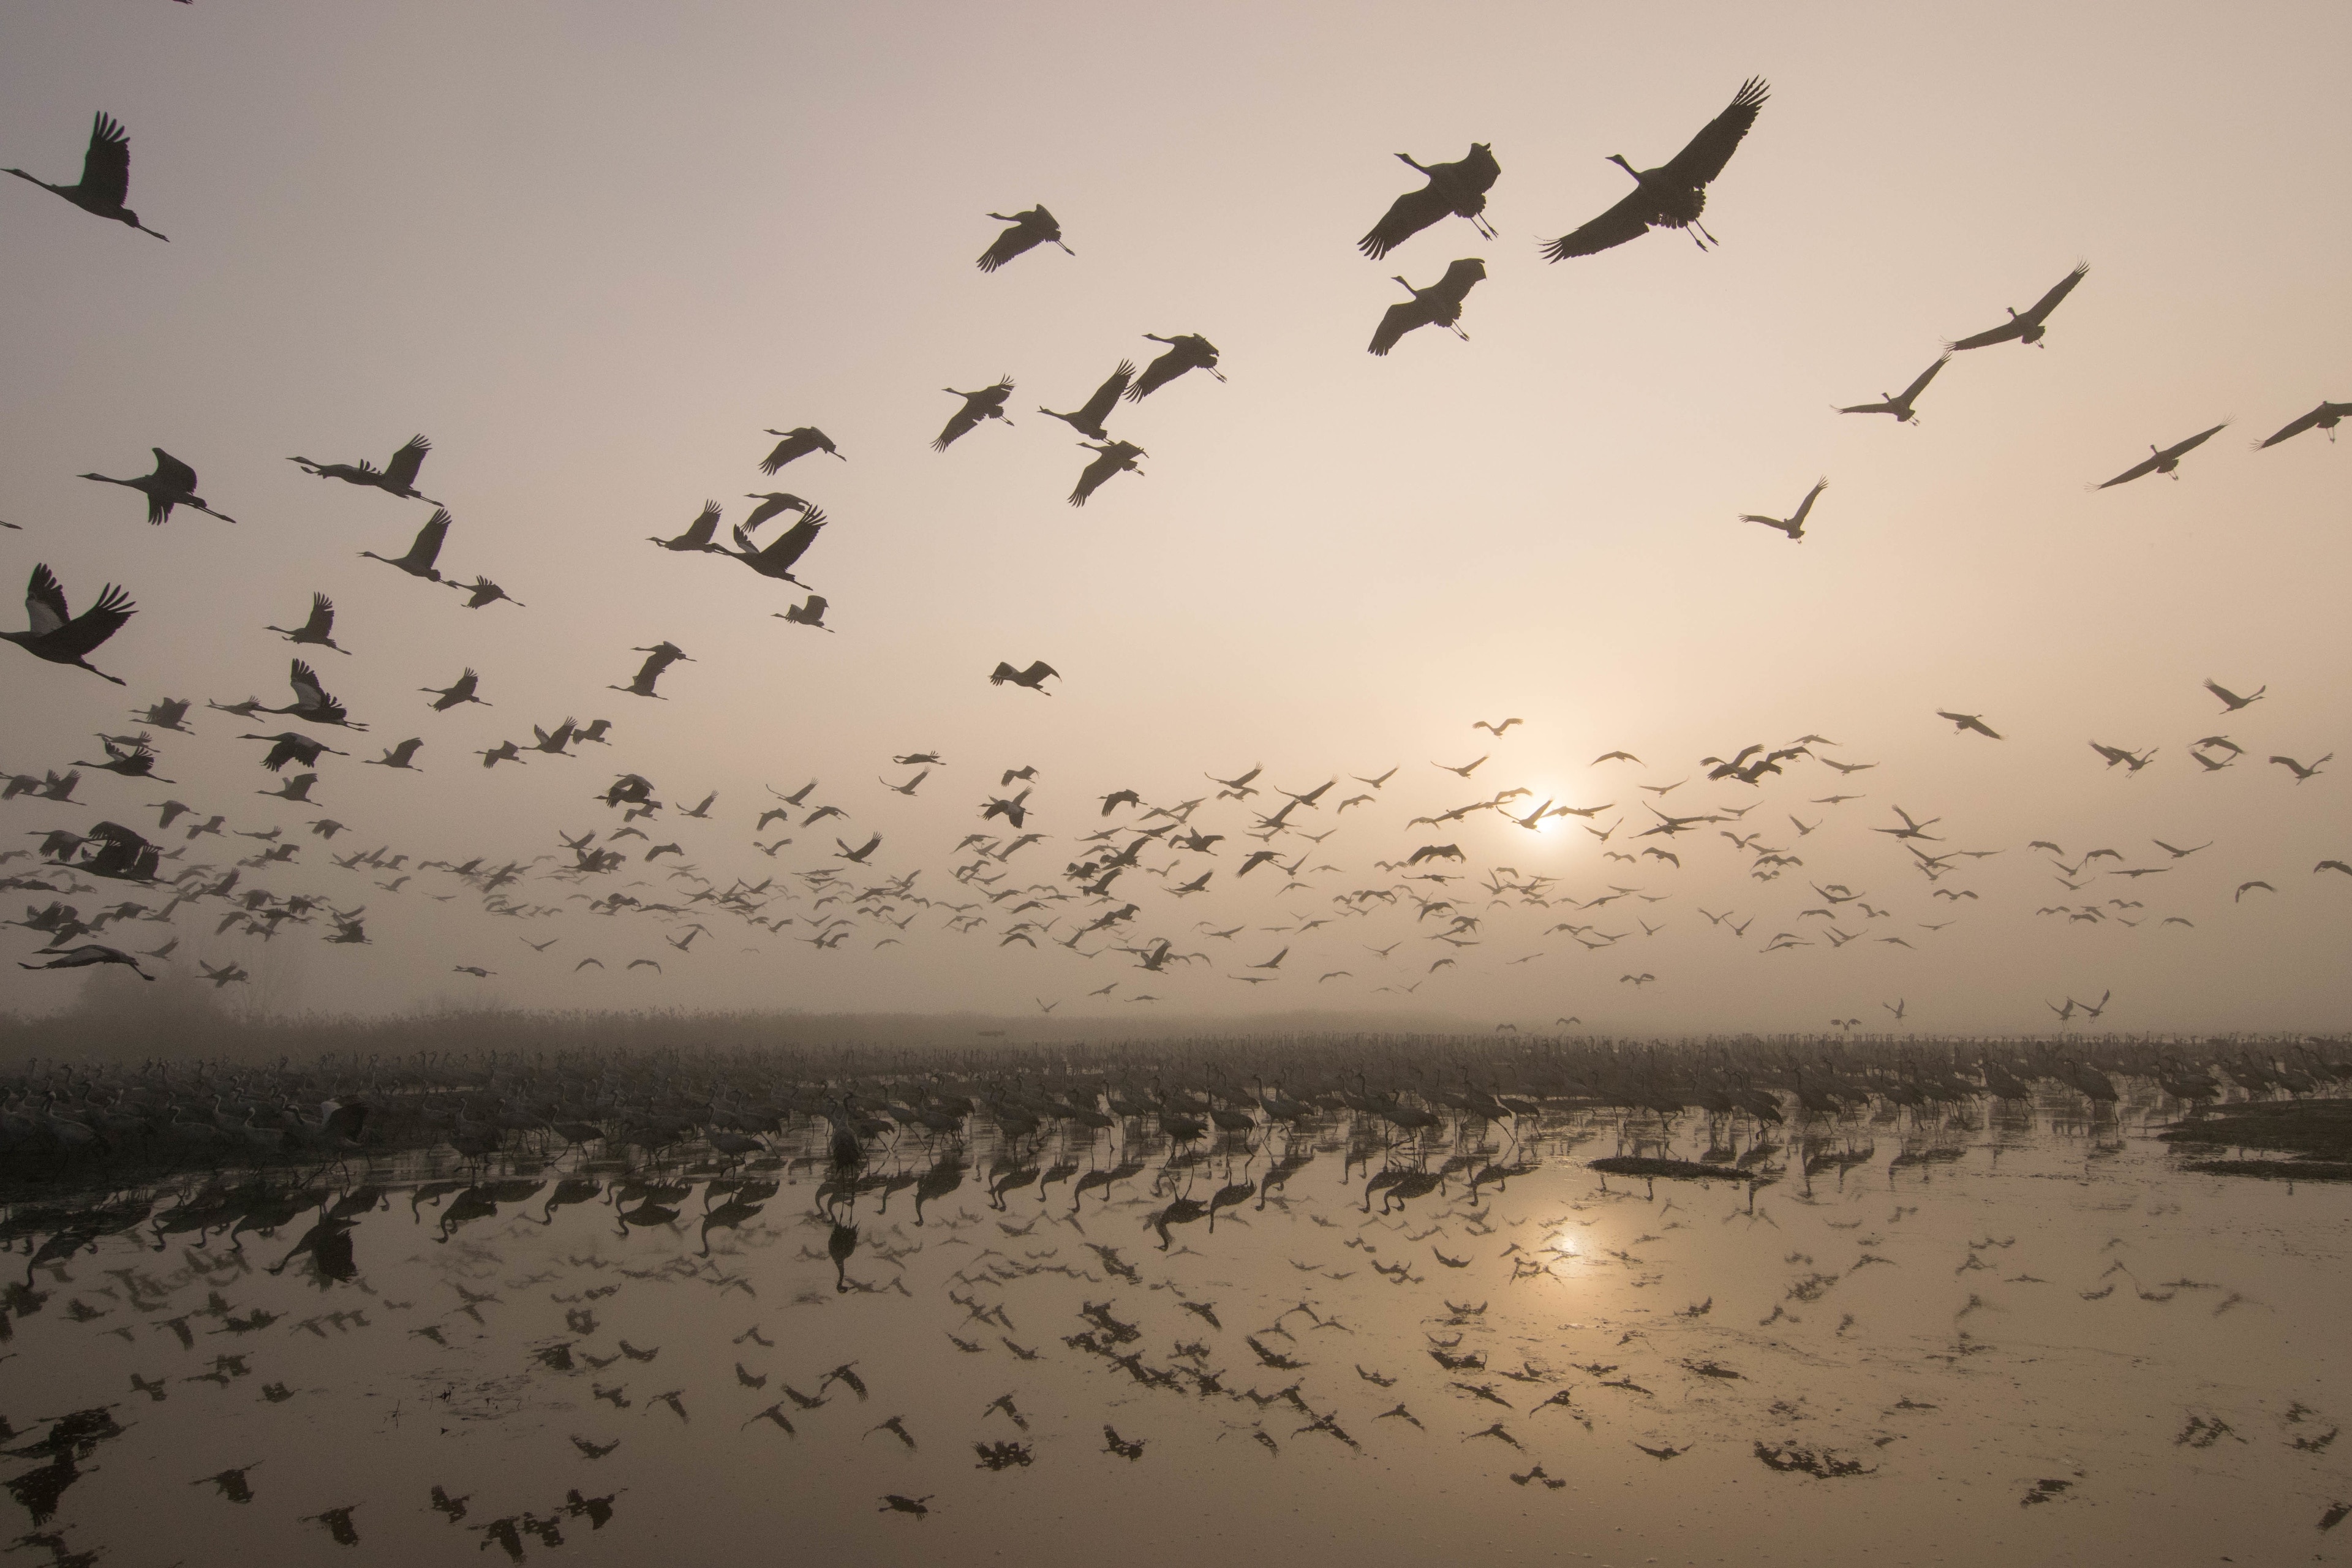 #BvS100K


these birds are migrating from Europe to Africa In the Winter time, to stay warm. Israel is a good spot to stop and recharge the energy to make it all the way to Africa. there's this lake in the north of israel named Agamon HaHula which they stop there, gain energy, eat and then keep flying after getting the energy they need these birds make this cycle every year when the winter comes, then come back in the summer when it's warm. This Photo was taken at sunrise when some of the birds continued the journey, and some still slept. If You Are In Israel, make sure to visit this place (its pretty underrated)